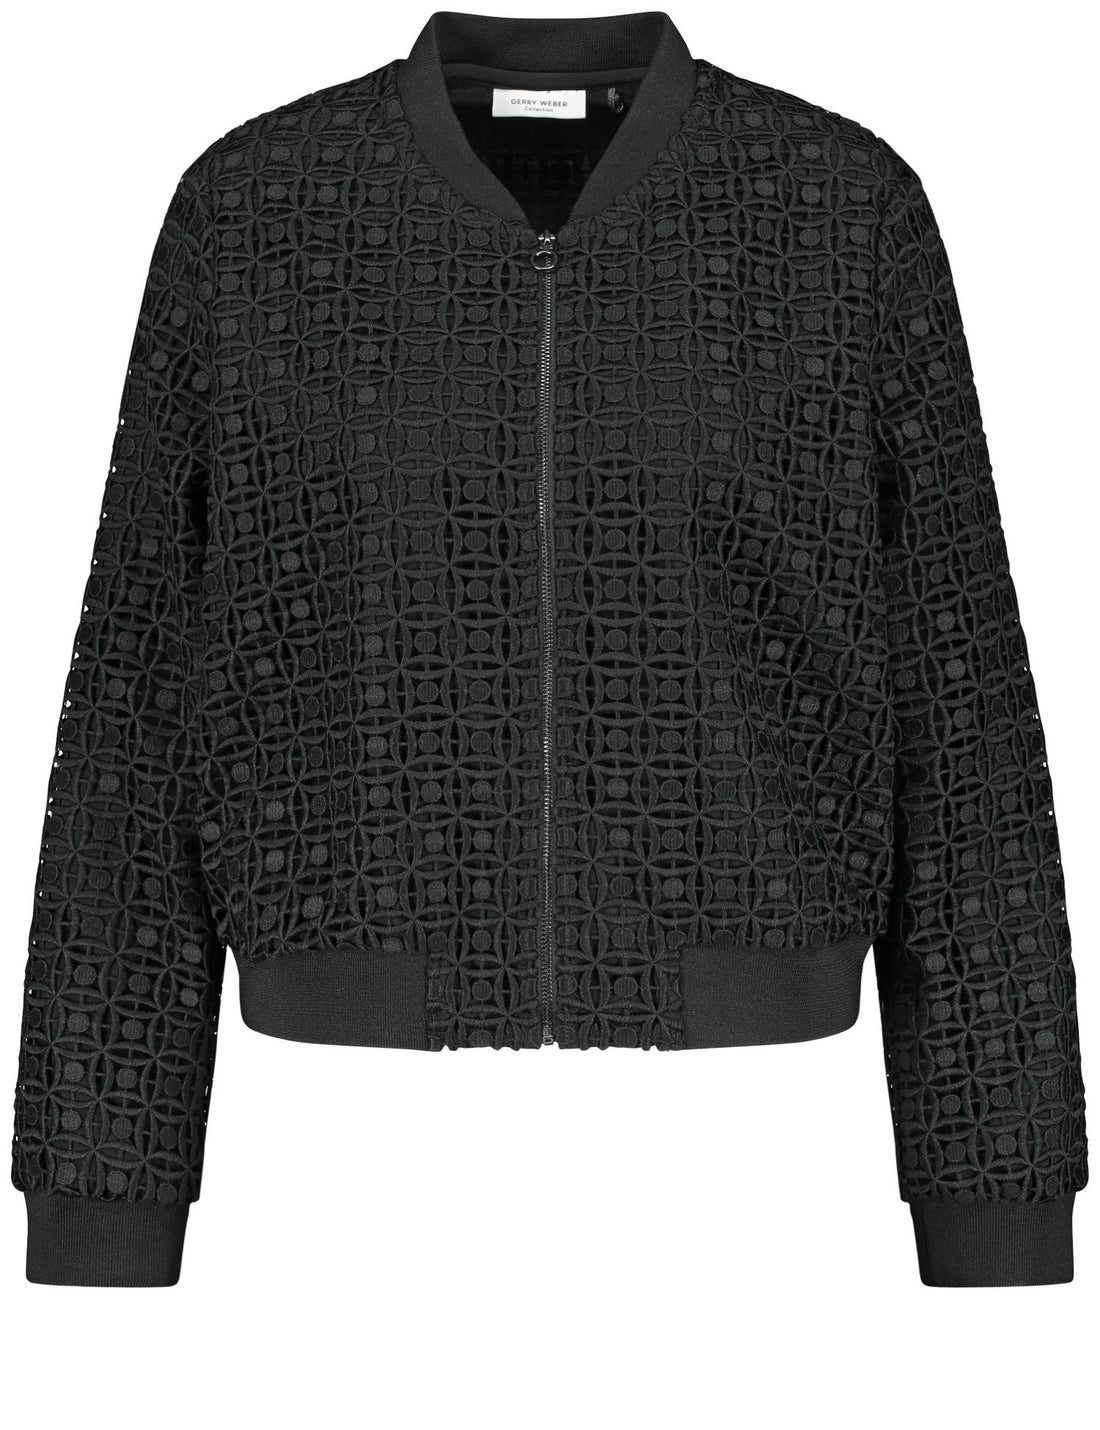 Bomber Jacket With Delicate Broderie Anglaise_230053-31237_11000_02